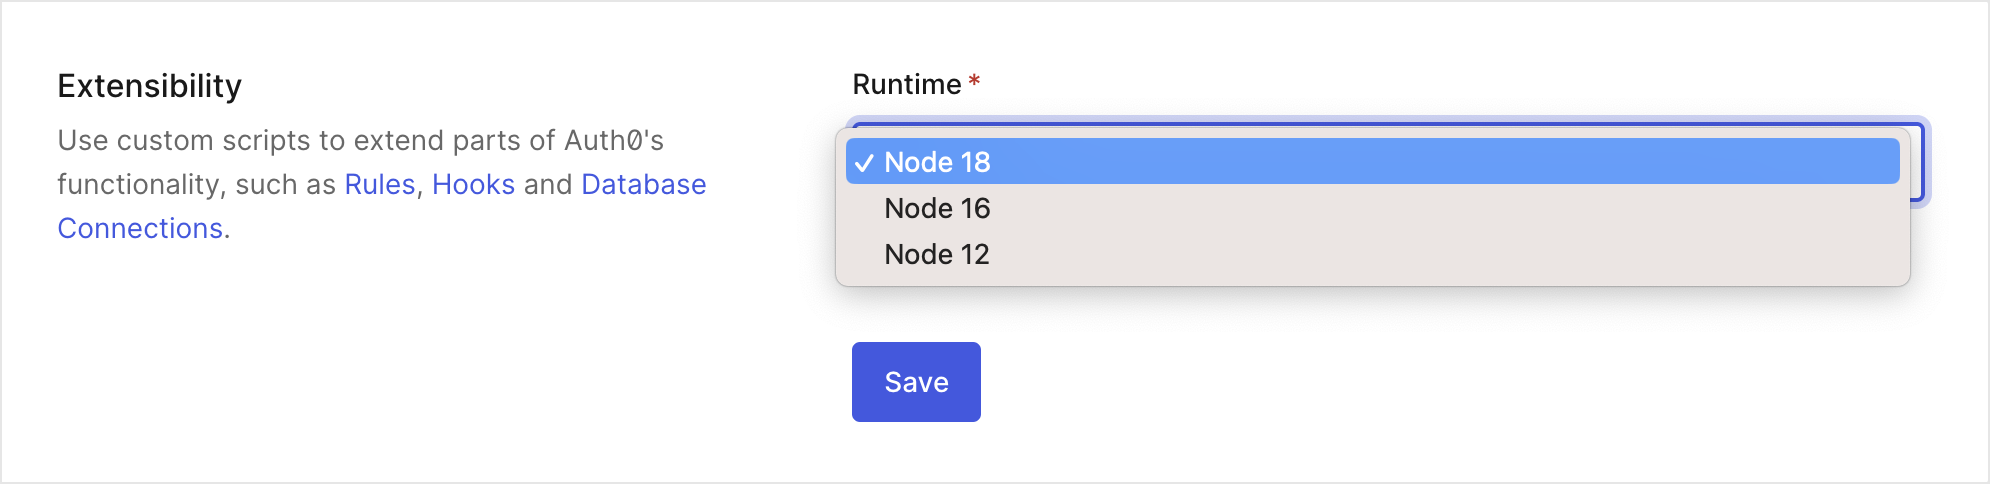 Dashboard > Settings > Advanced > Extensibility > Runtime